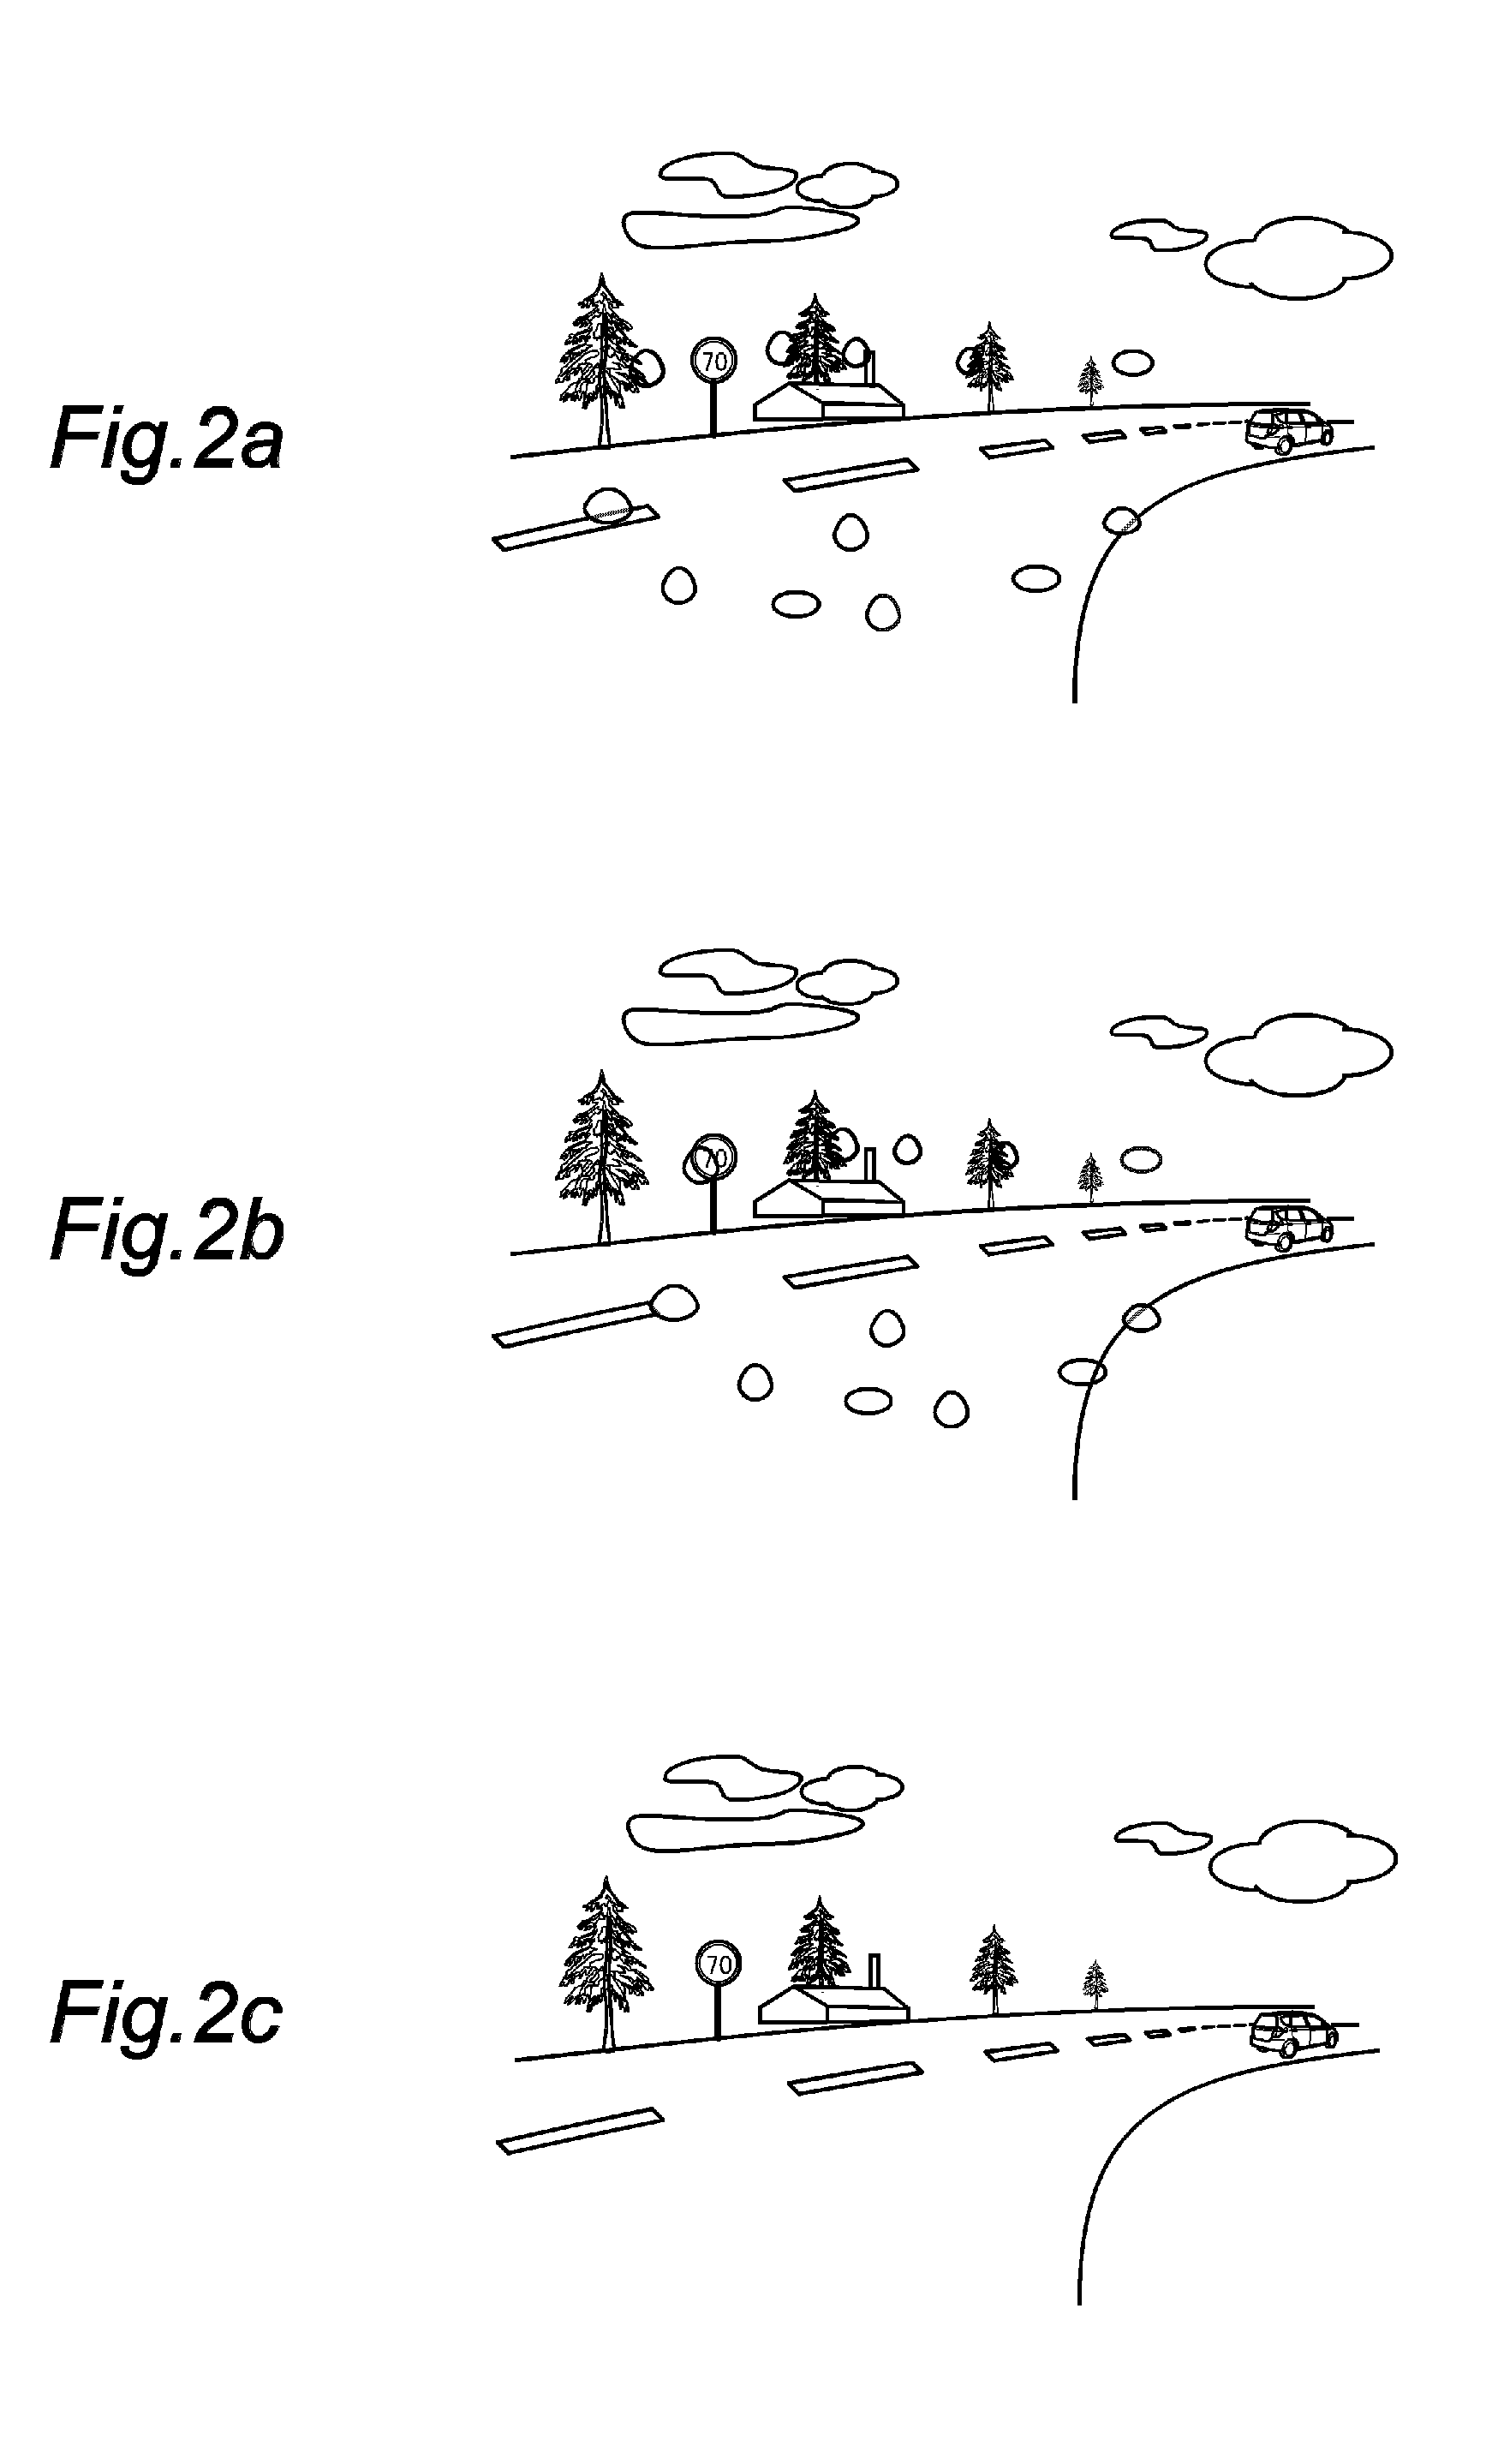 Image restoration method in computer vision system, including method and apparatus for identifying raindrops on a windshield